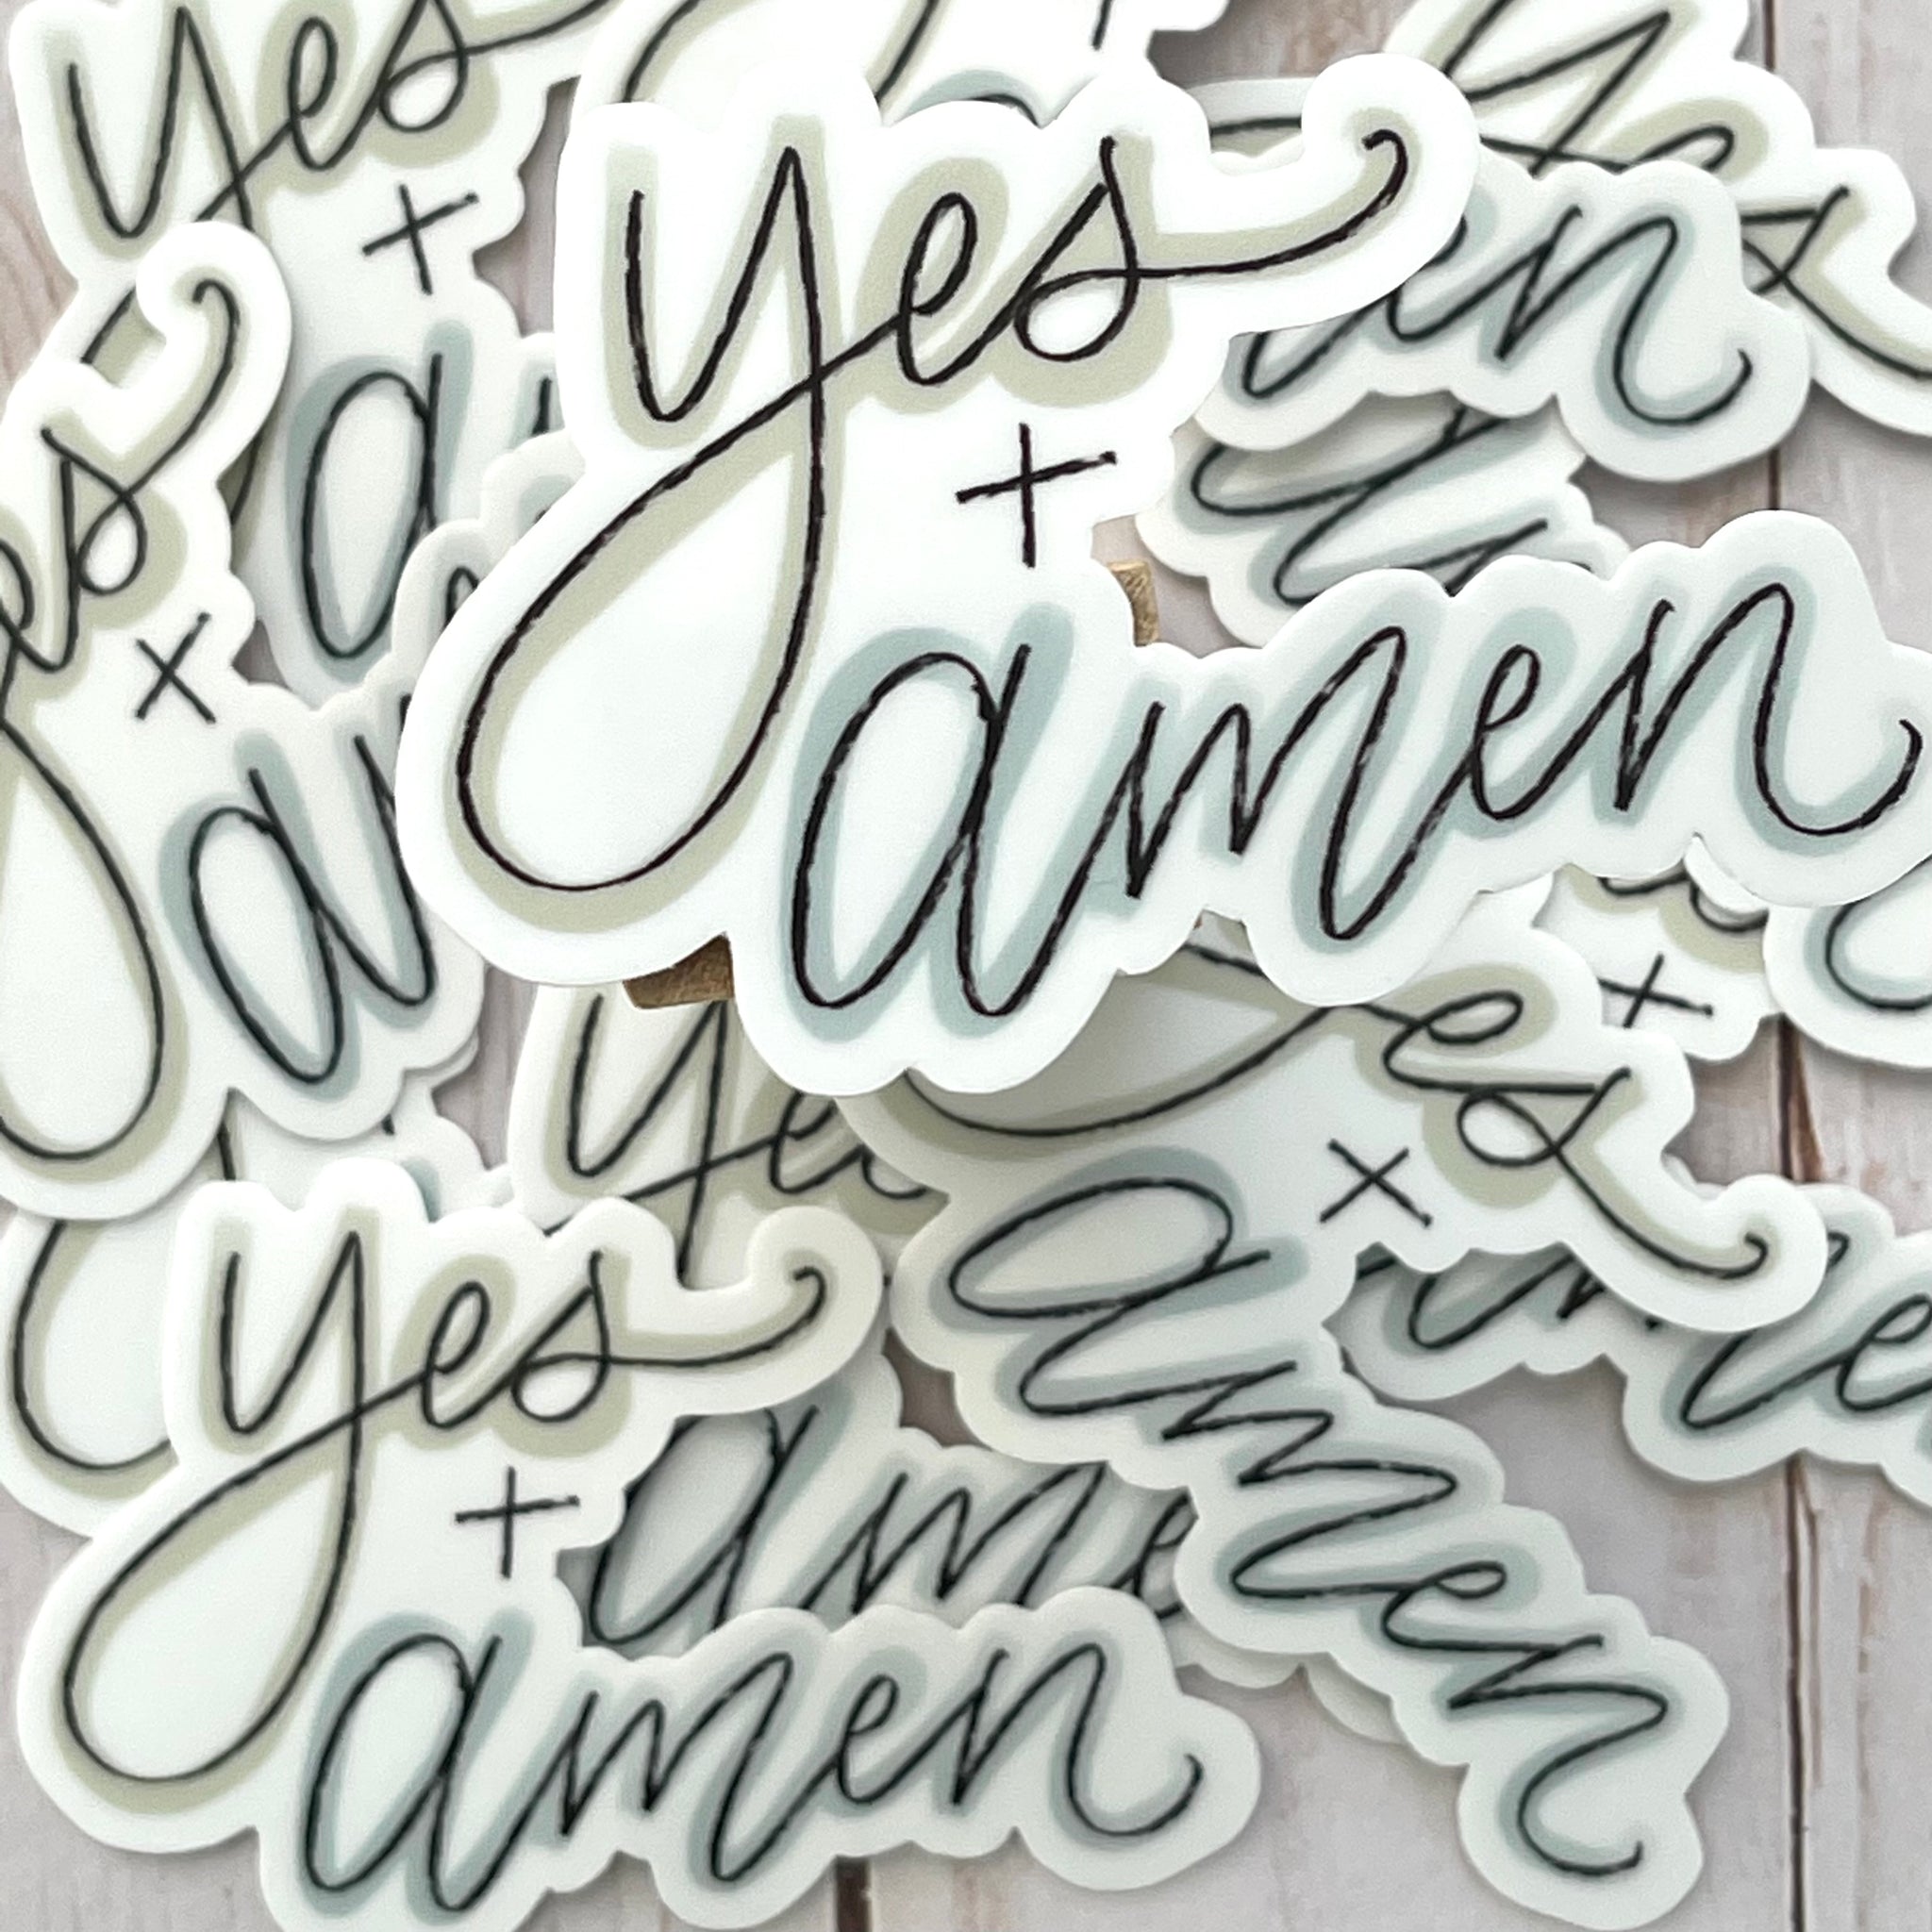 Yes and Amen Sticker